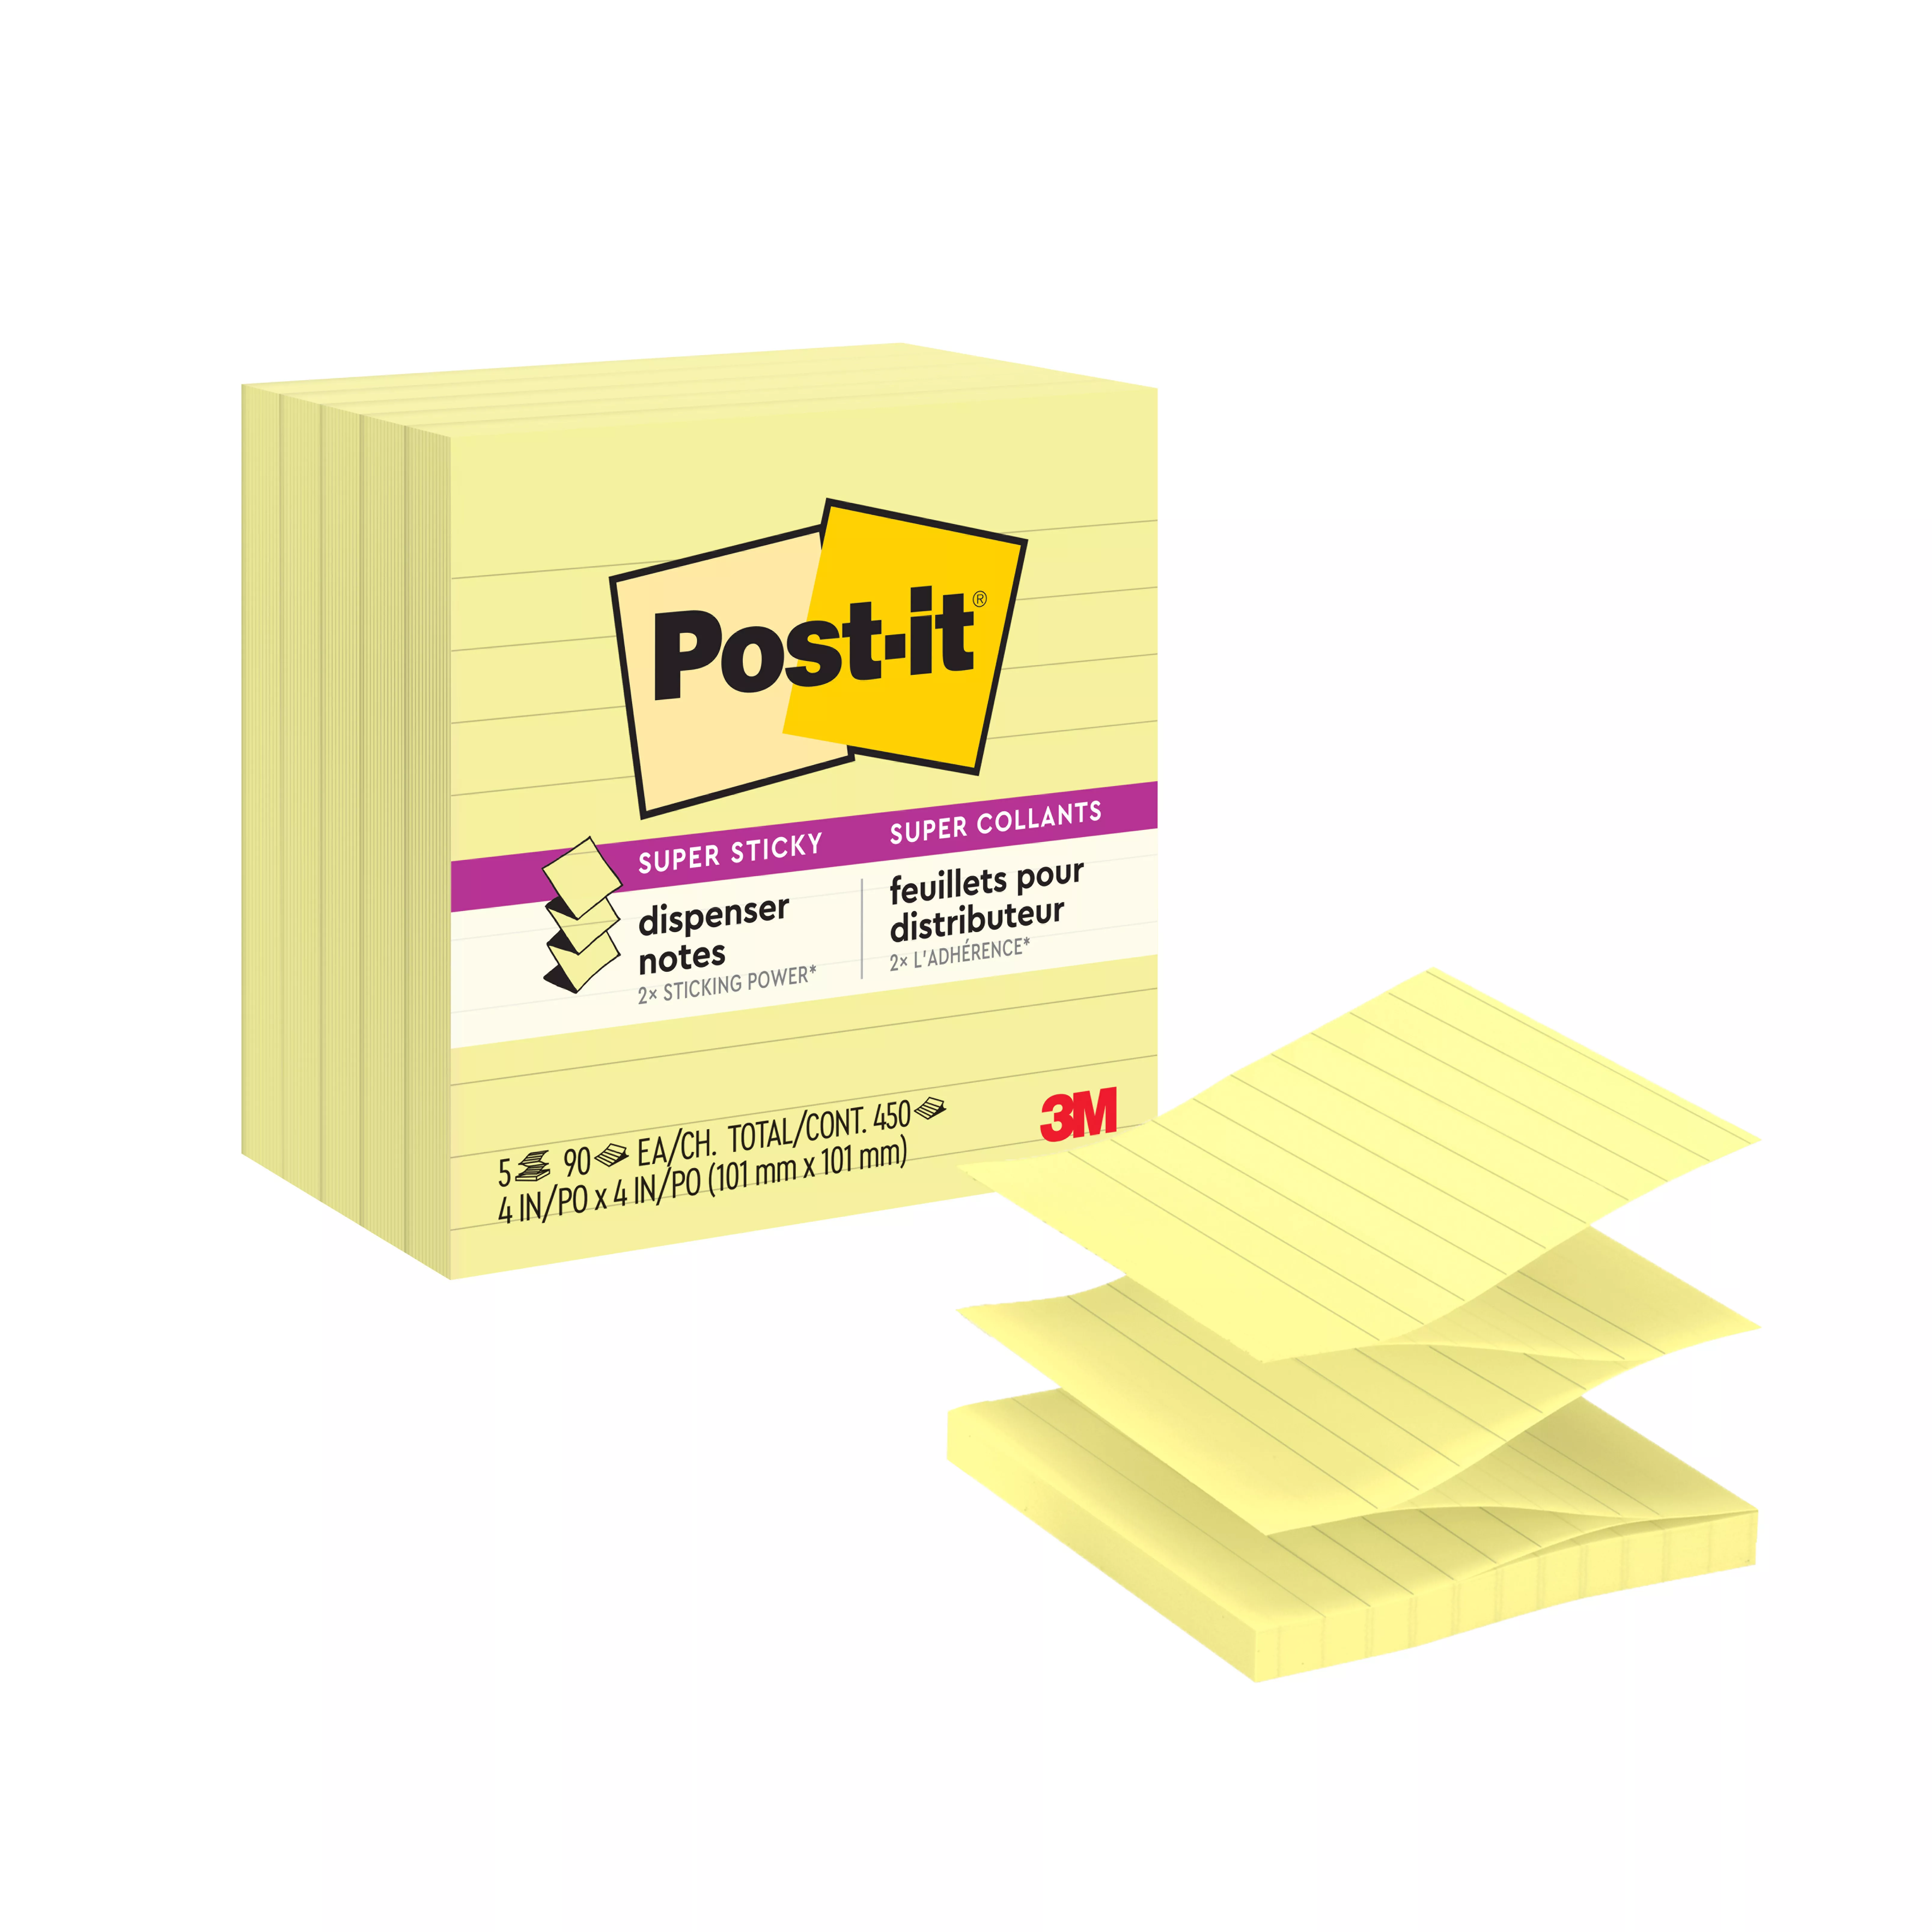 Post-it® Super Sticky Dispenser Pop-up Notes R440-YWSS, 4 in x 4 in (101 mm x 101 mm), Canary Yellow